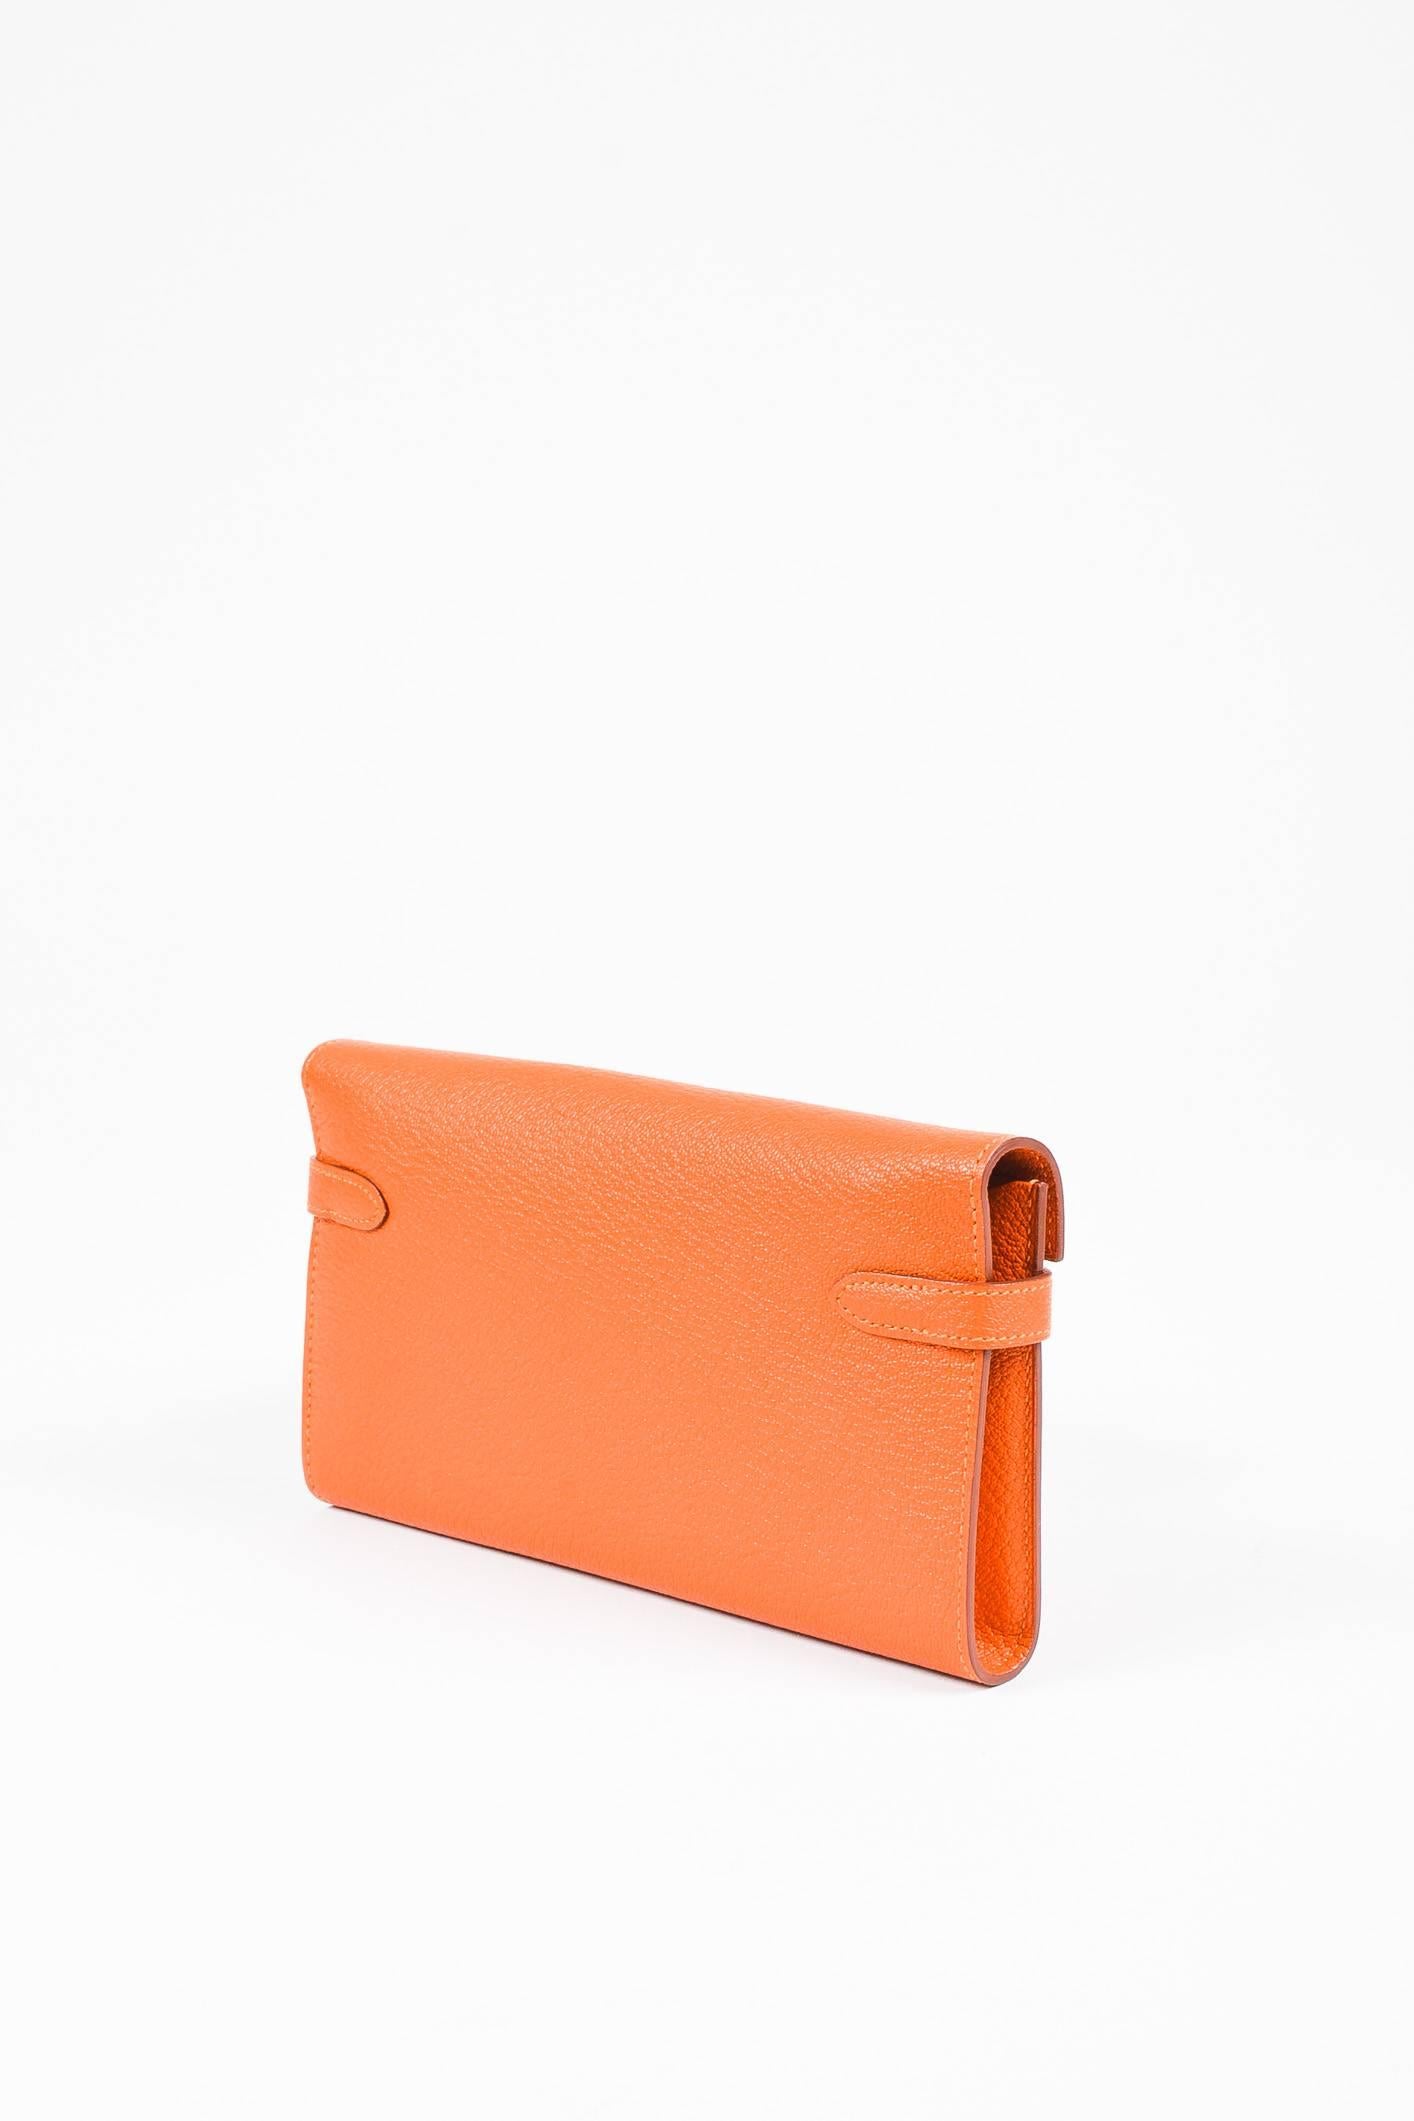 Color: Orange,Feu
Style: Kelly
Made In: France
Fabric Content: Chevre Mysore Leather

Item Specifics & Details: A must-have everyday accessory that also doubles as an evening clutch, the iconic "Kelly" wallet in a beautiful shade